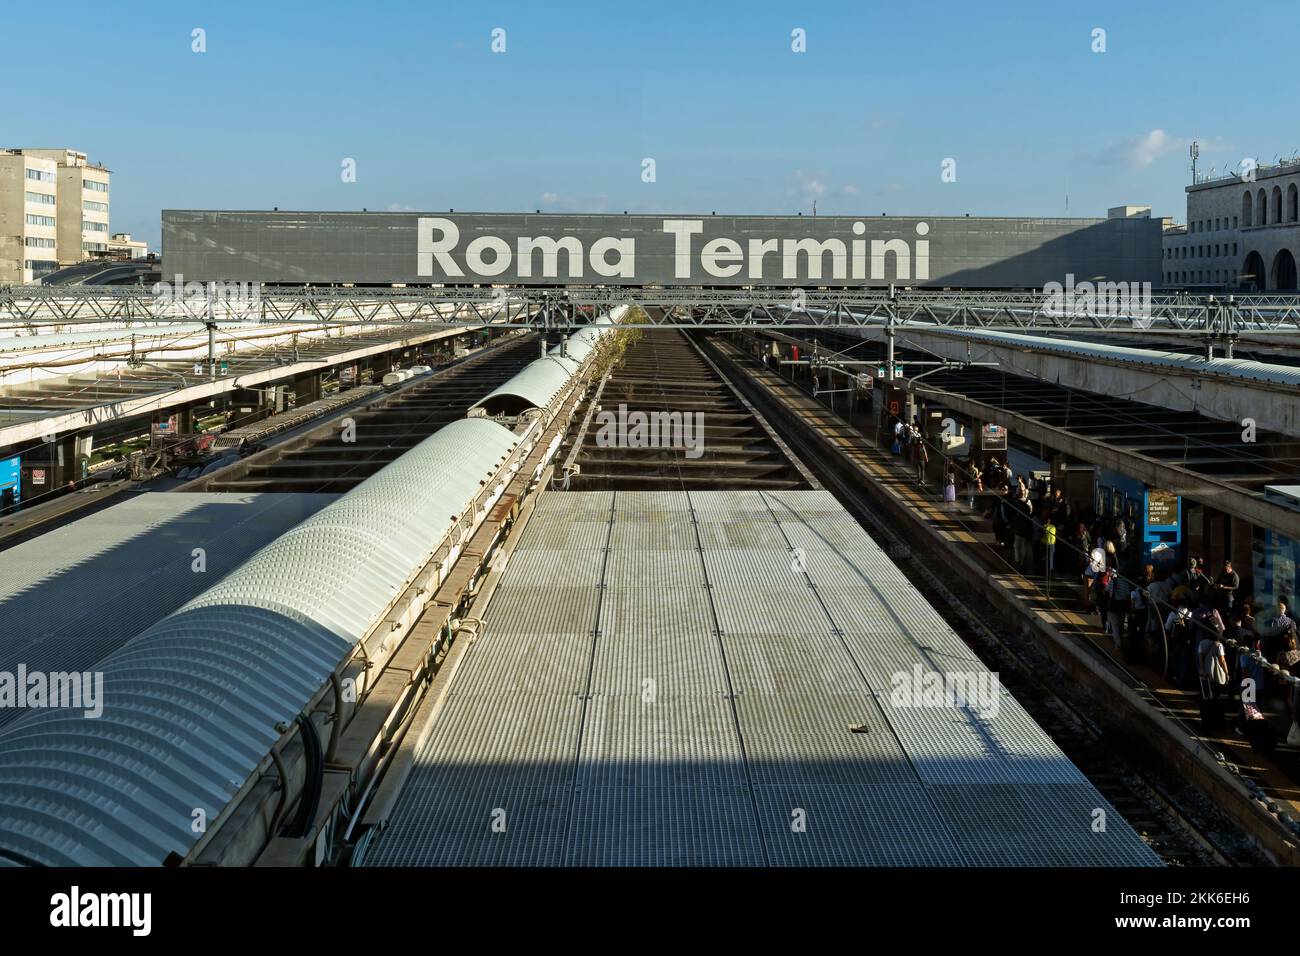 Roma Termini central railway station is the main public transport terminal for rail, metro, buses and trams. Rome, Italy, Europe, EU. - Copy space Stock Photo